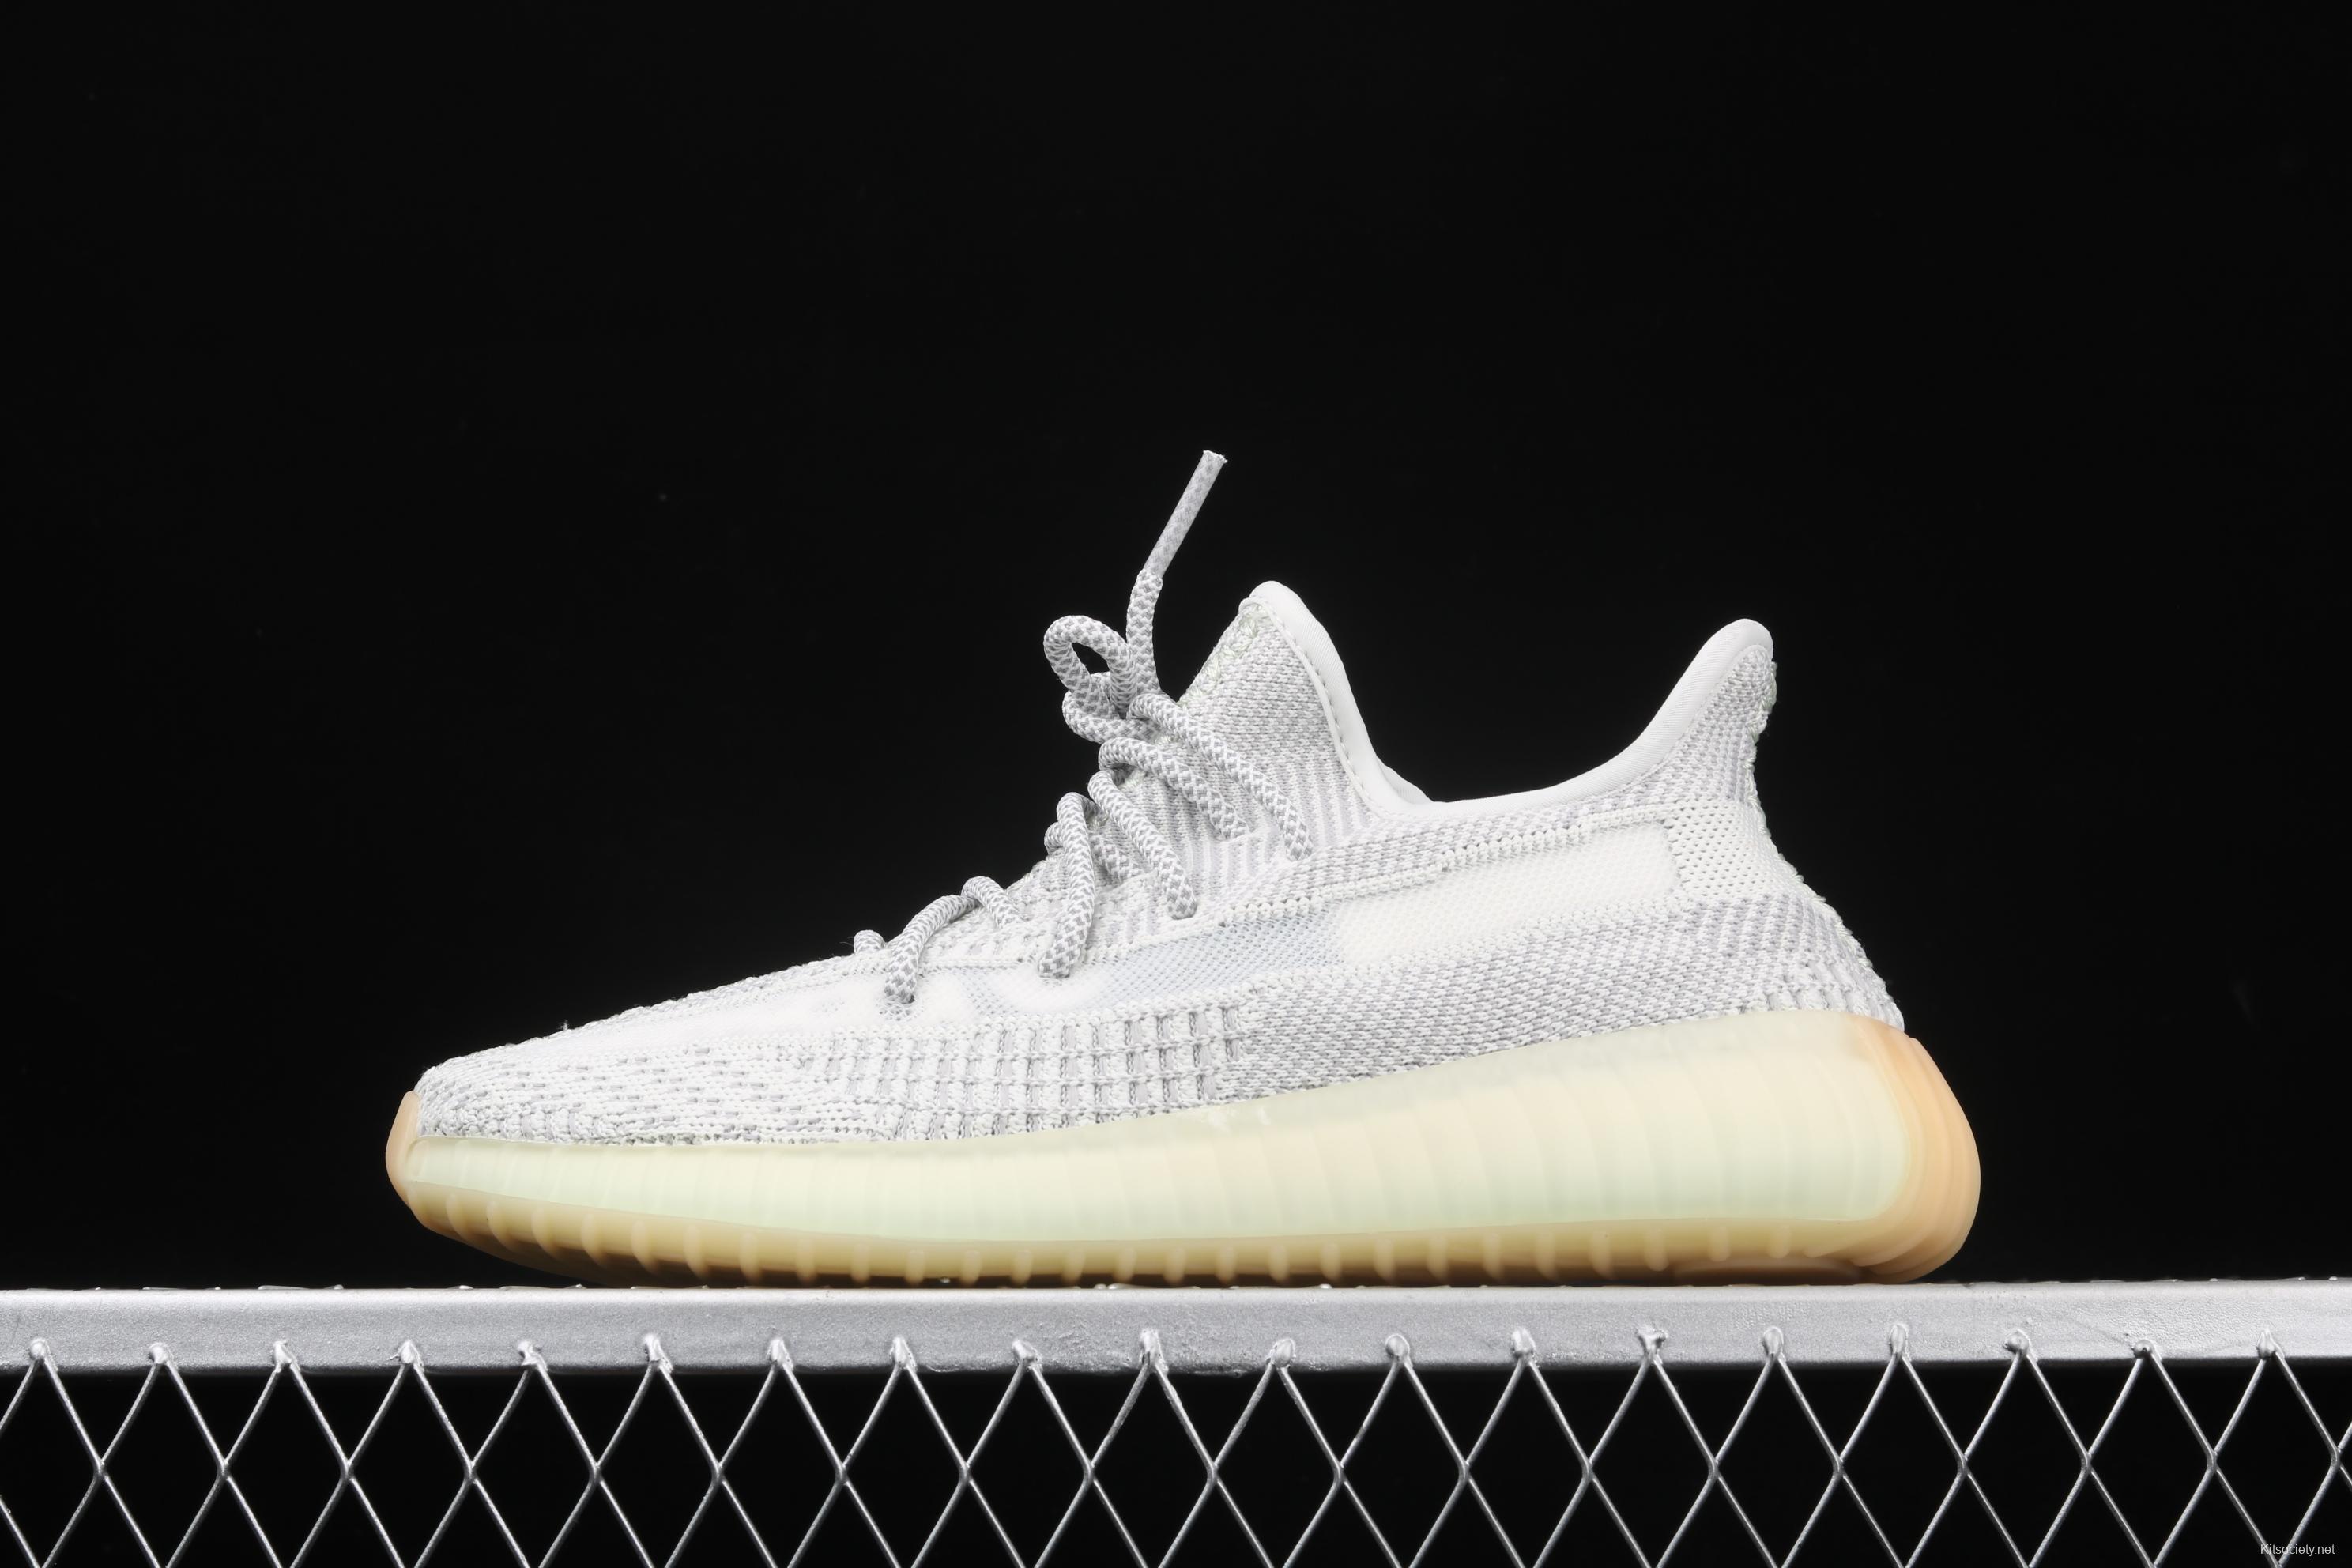 God følelse Fedt Tåler Adidas Yeezy Boost 350V2 Tailgate FX4348 Darth Coconut 350 second  generation hollowed-out Asian gray angel color - Kitsociety